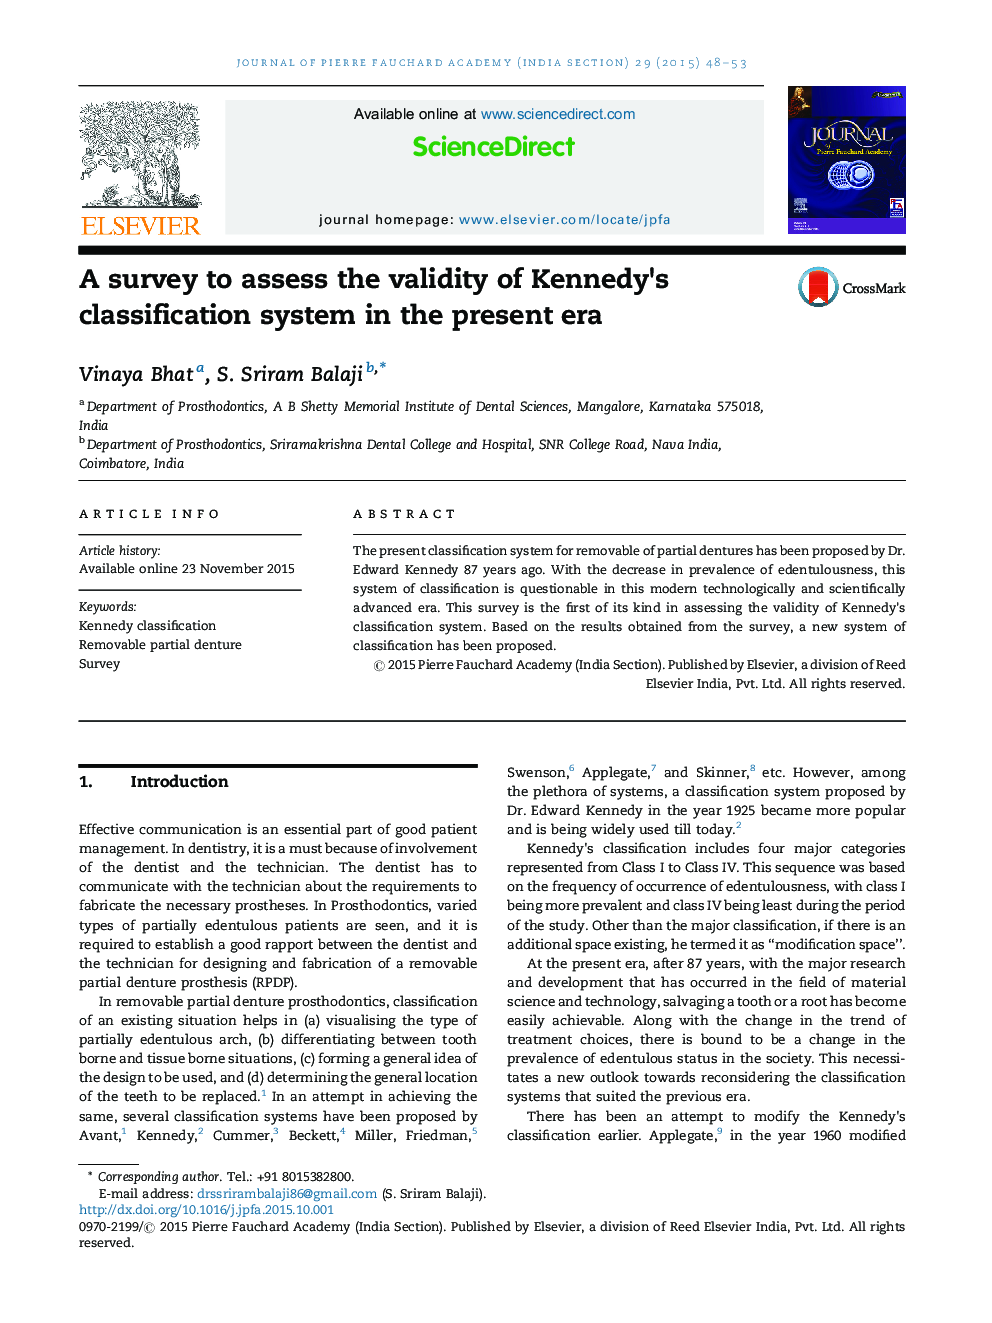 A survey to assess the validity of Kennedy's classification system in the present era